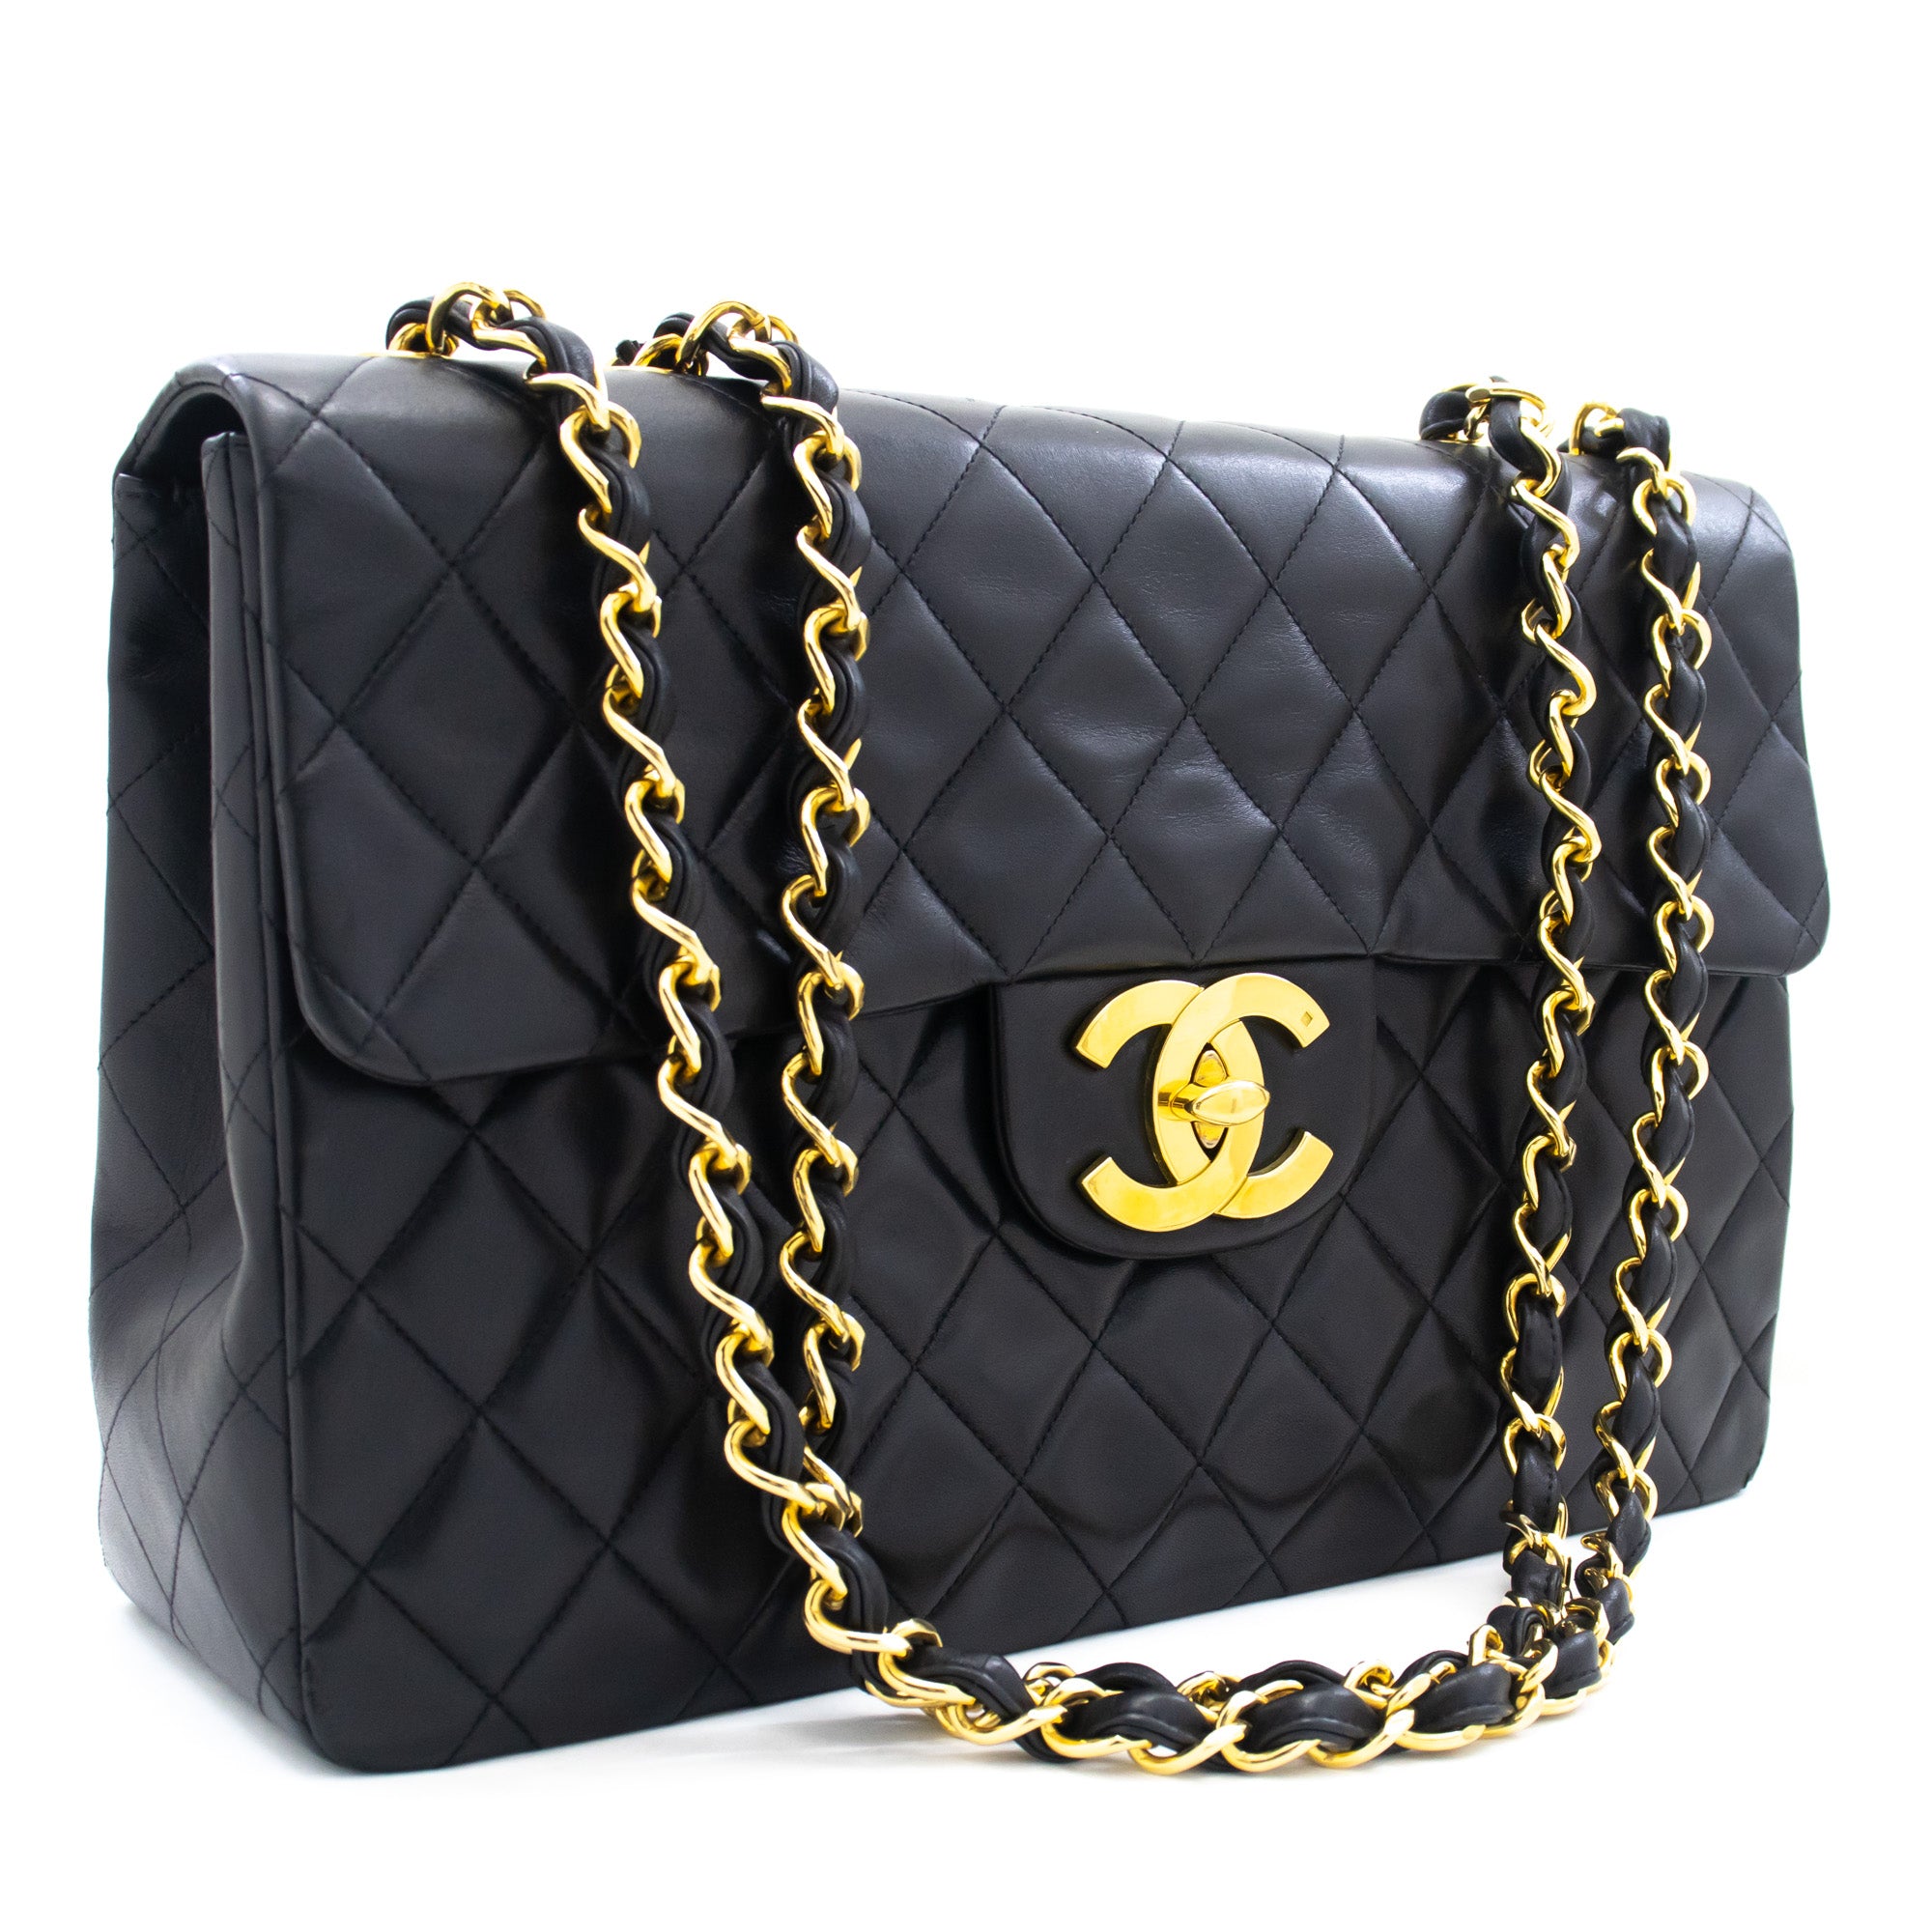 Vintage CHANEL black lambskin large tote bag with gold tone chains